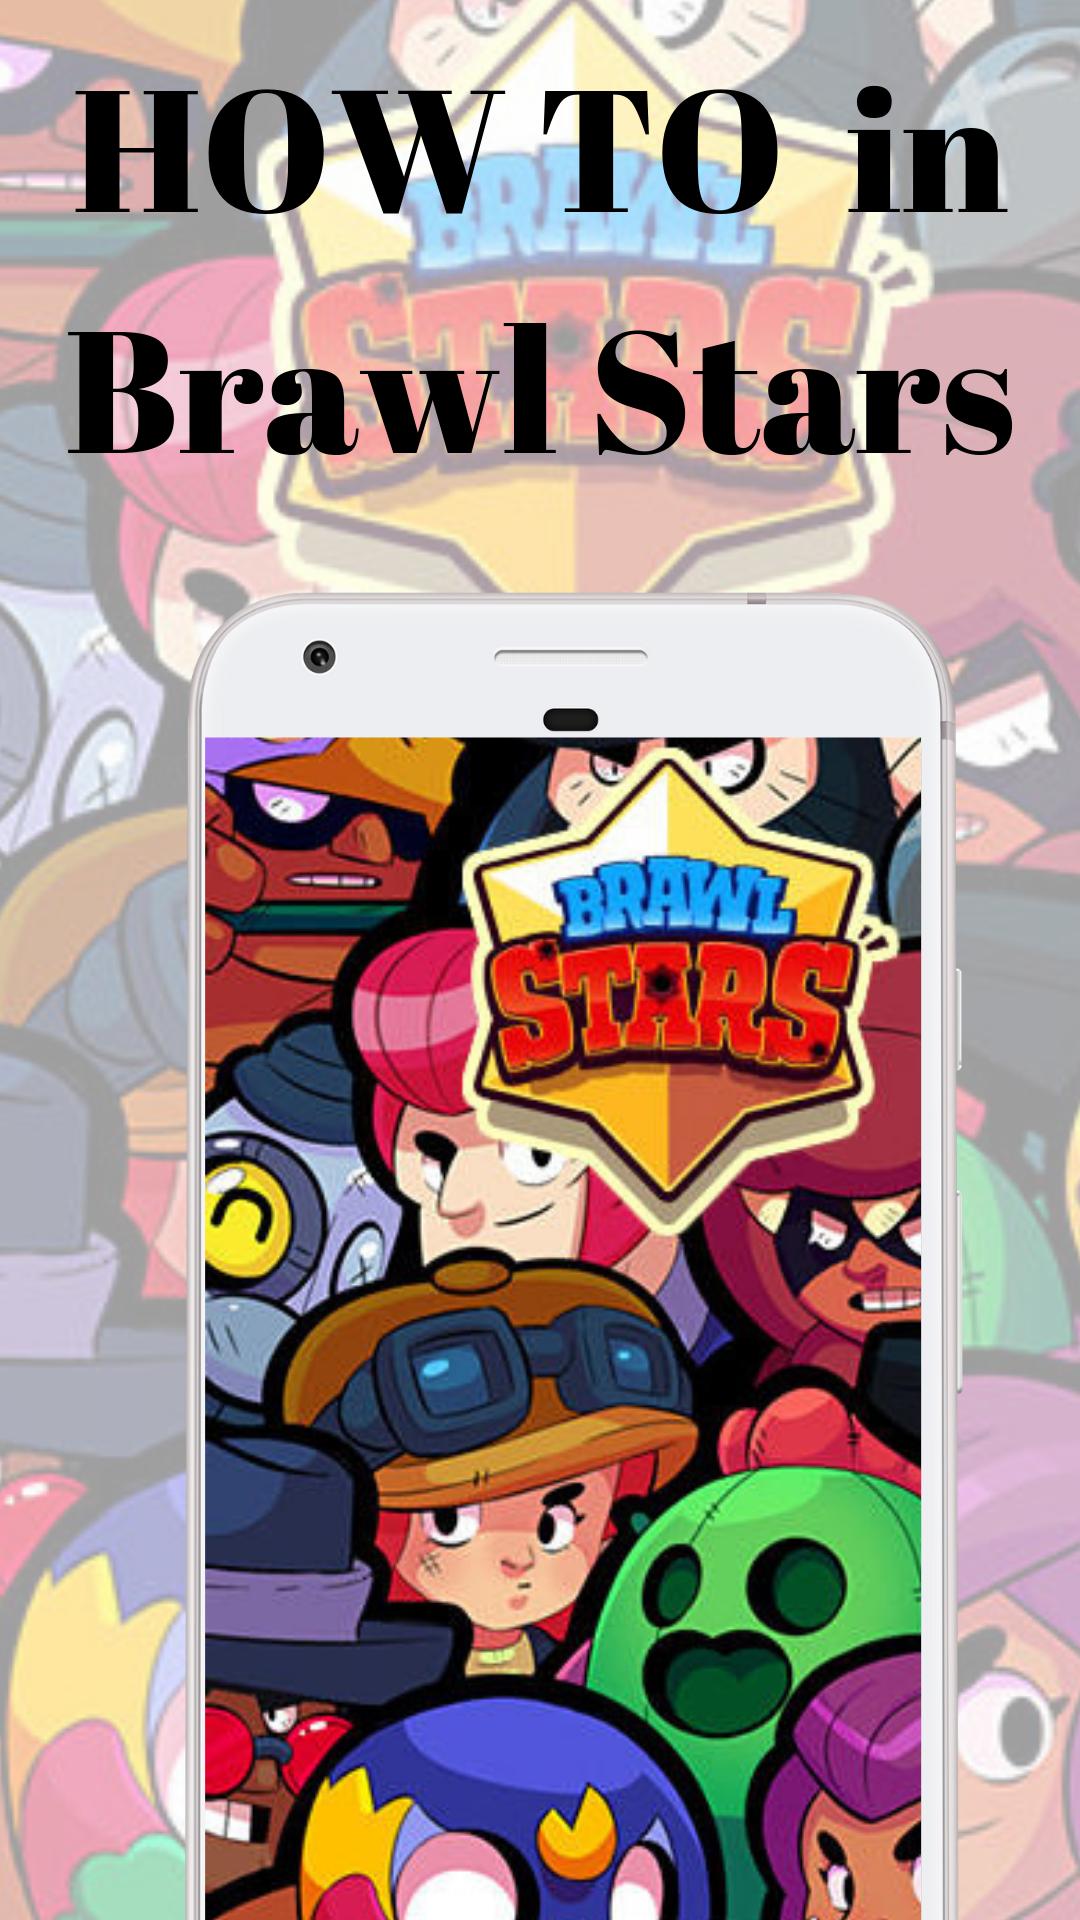 Your Own Profile In Brawl Stars Tutorial For Android Apk Download